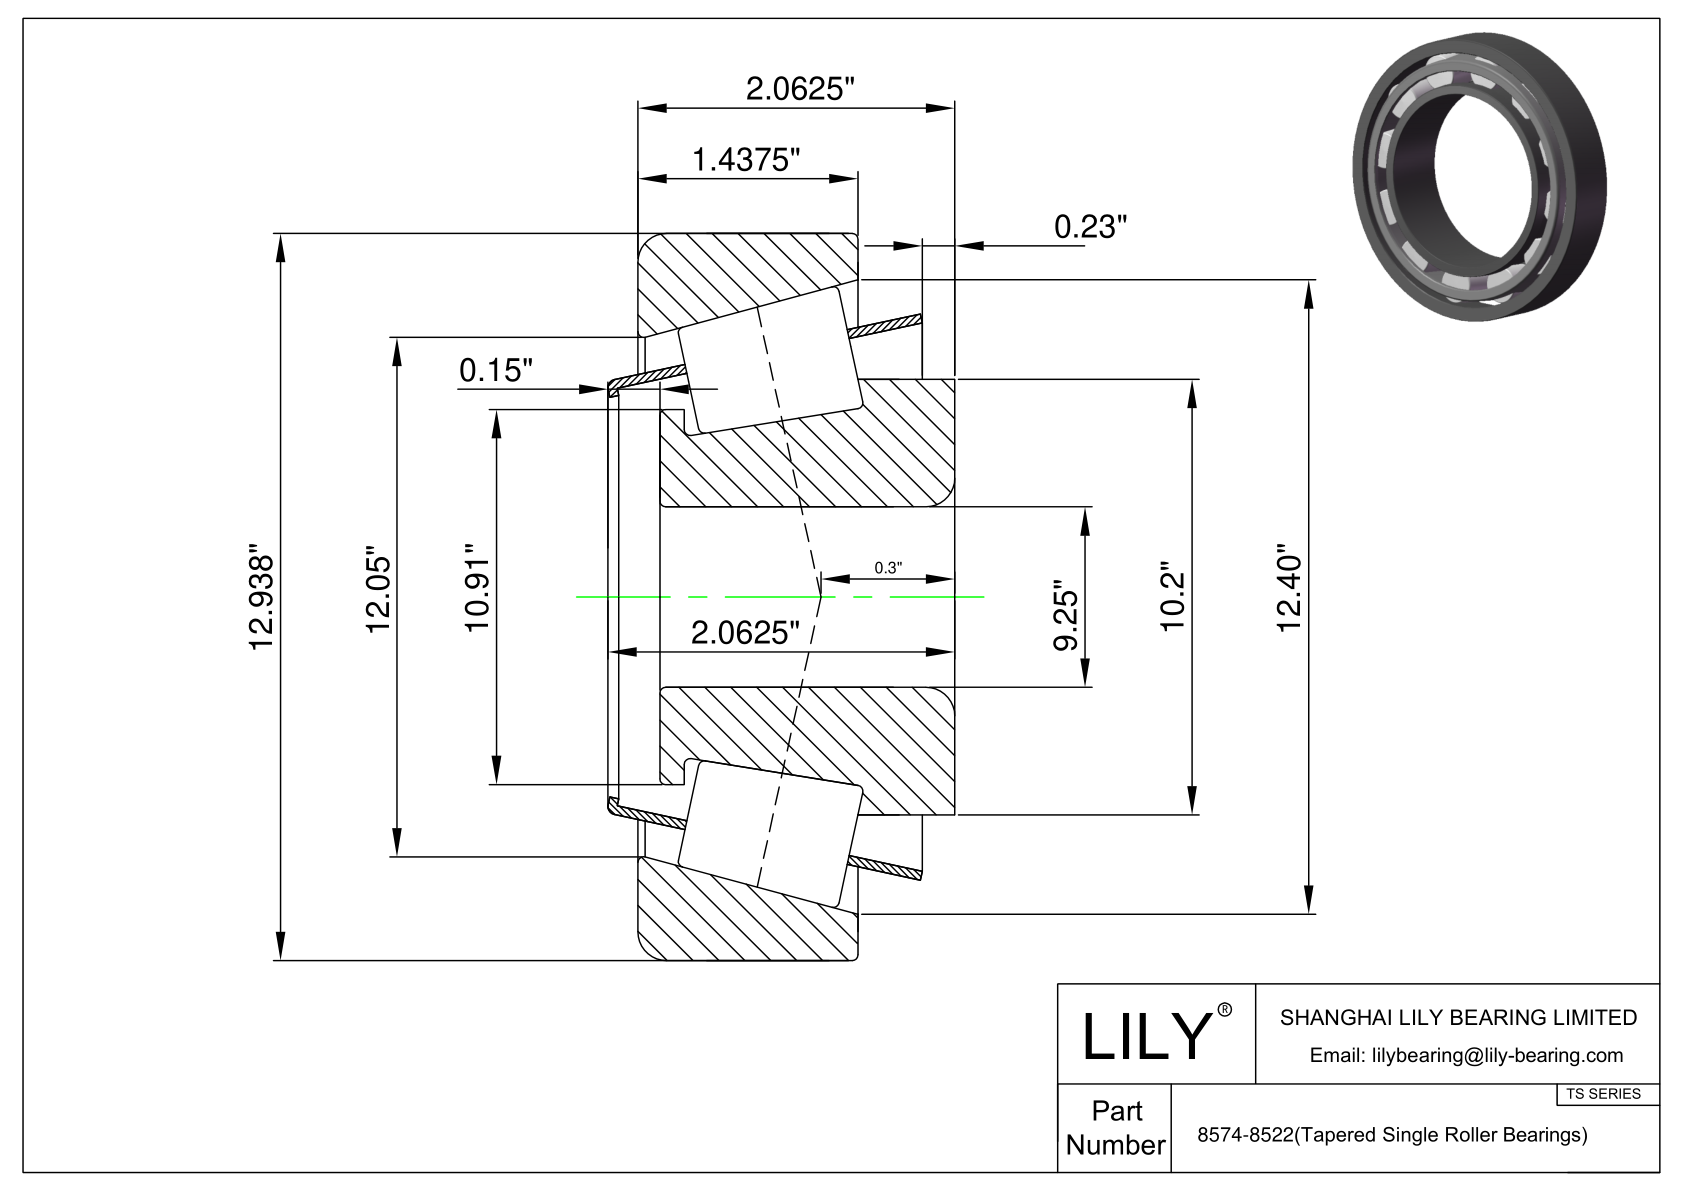 8574-8522 TS (Tapered Single Roller Bearings) (Imperial) cad drawing